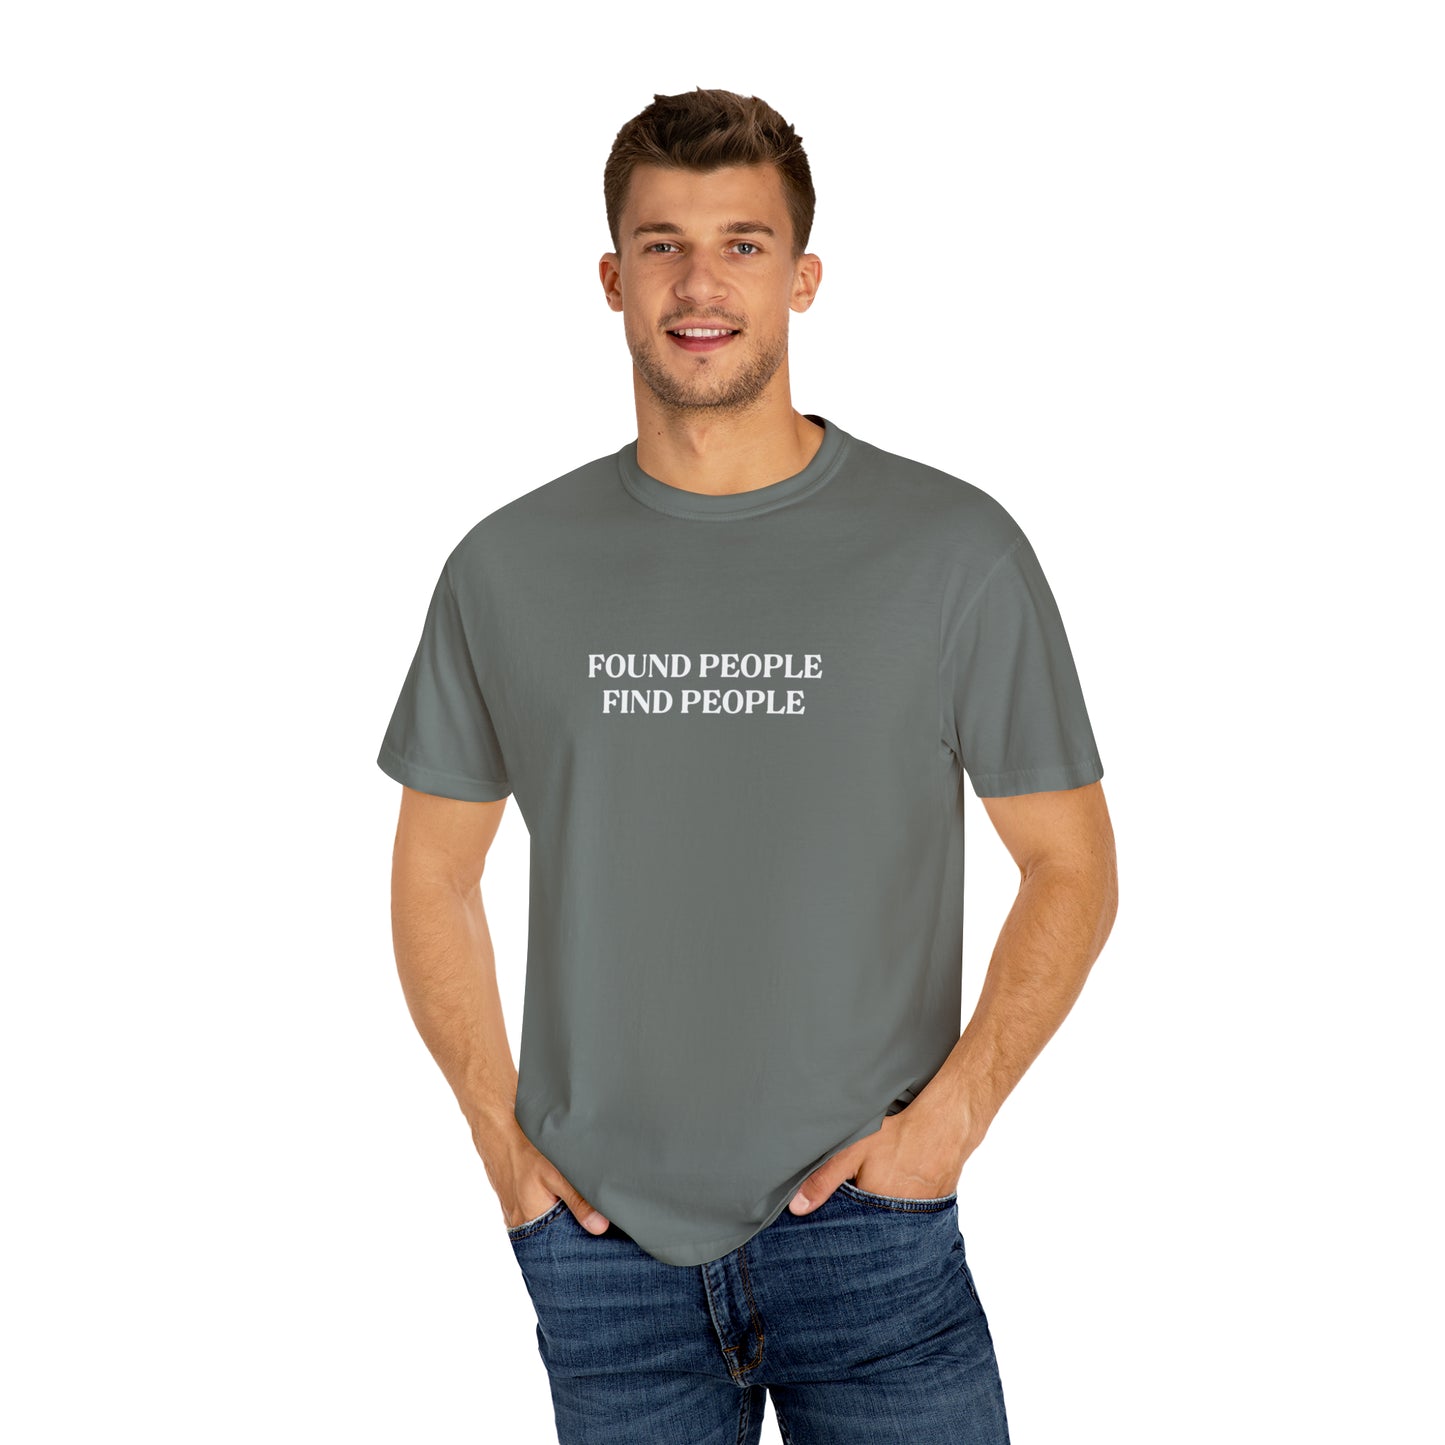 Found People Find People Tee